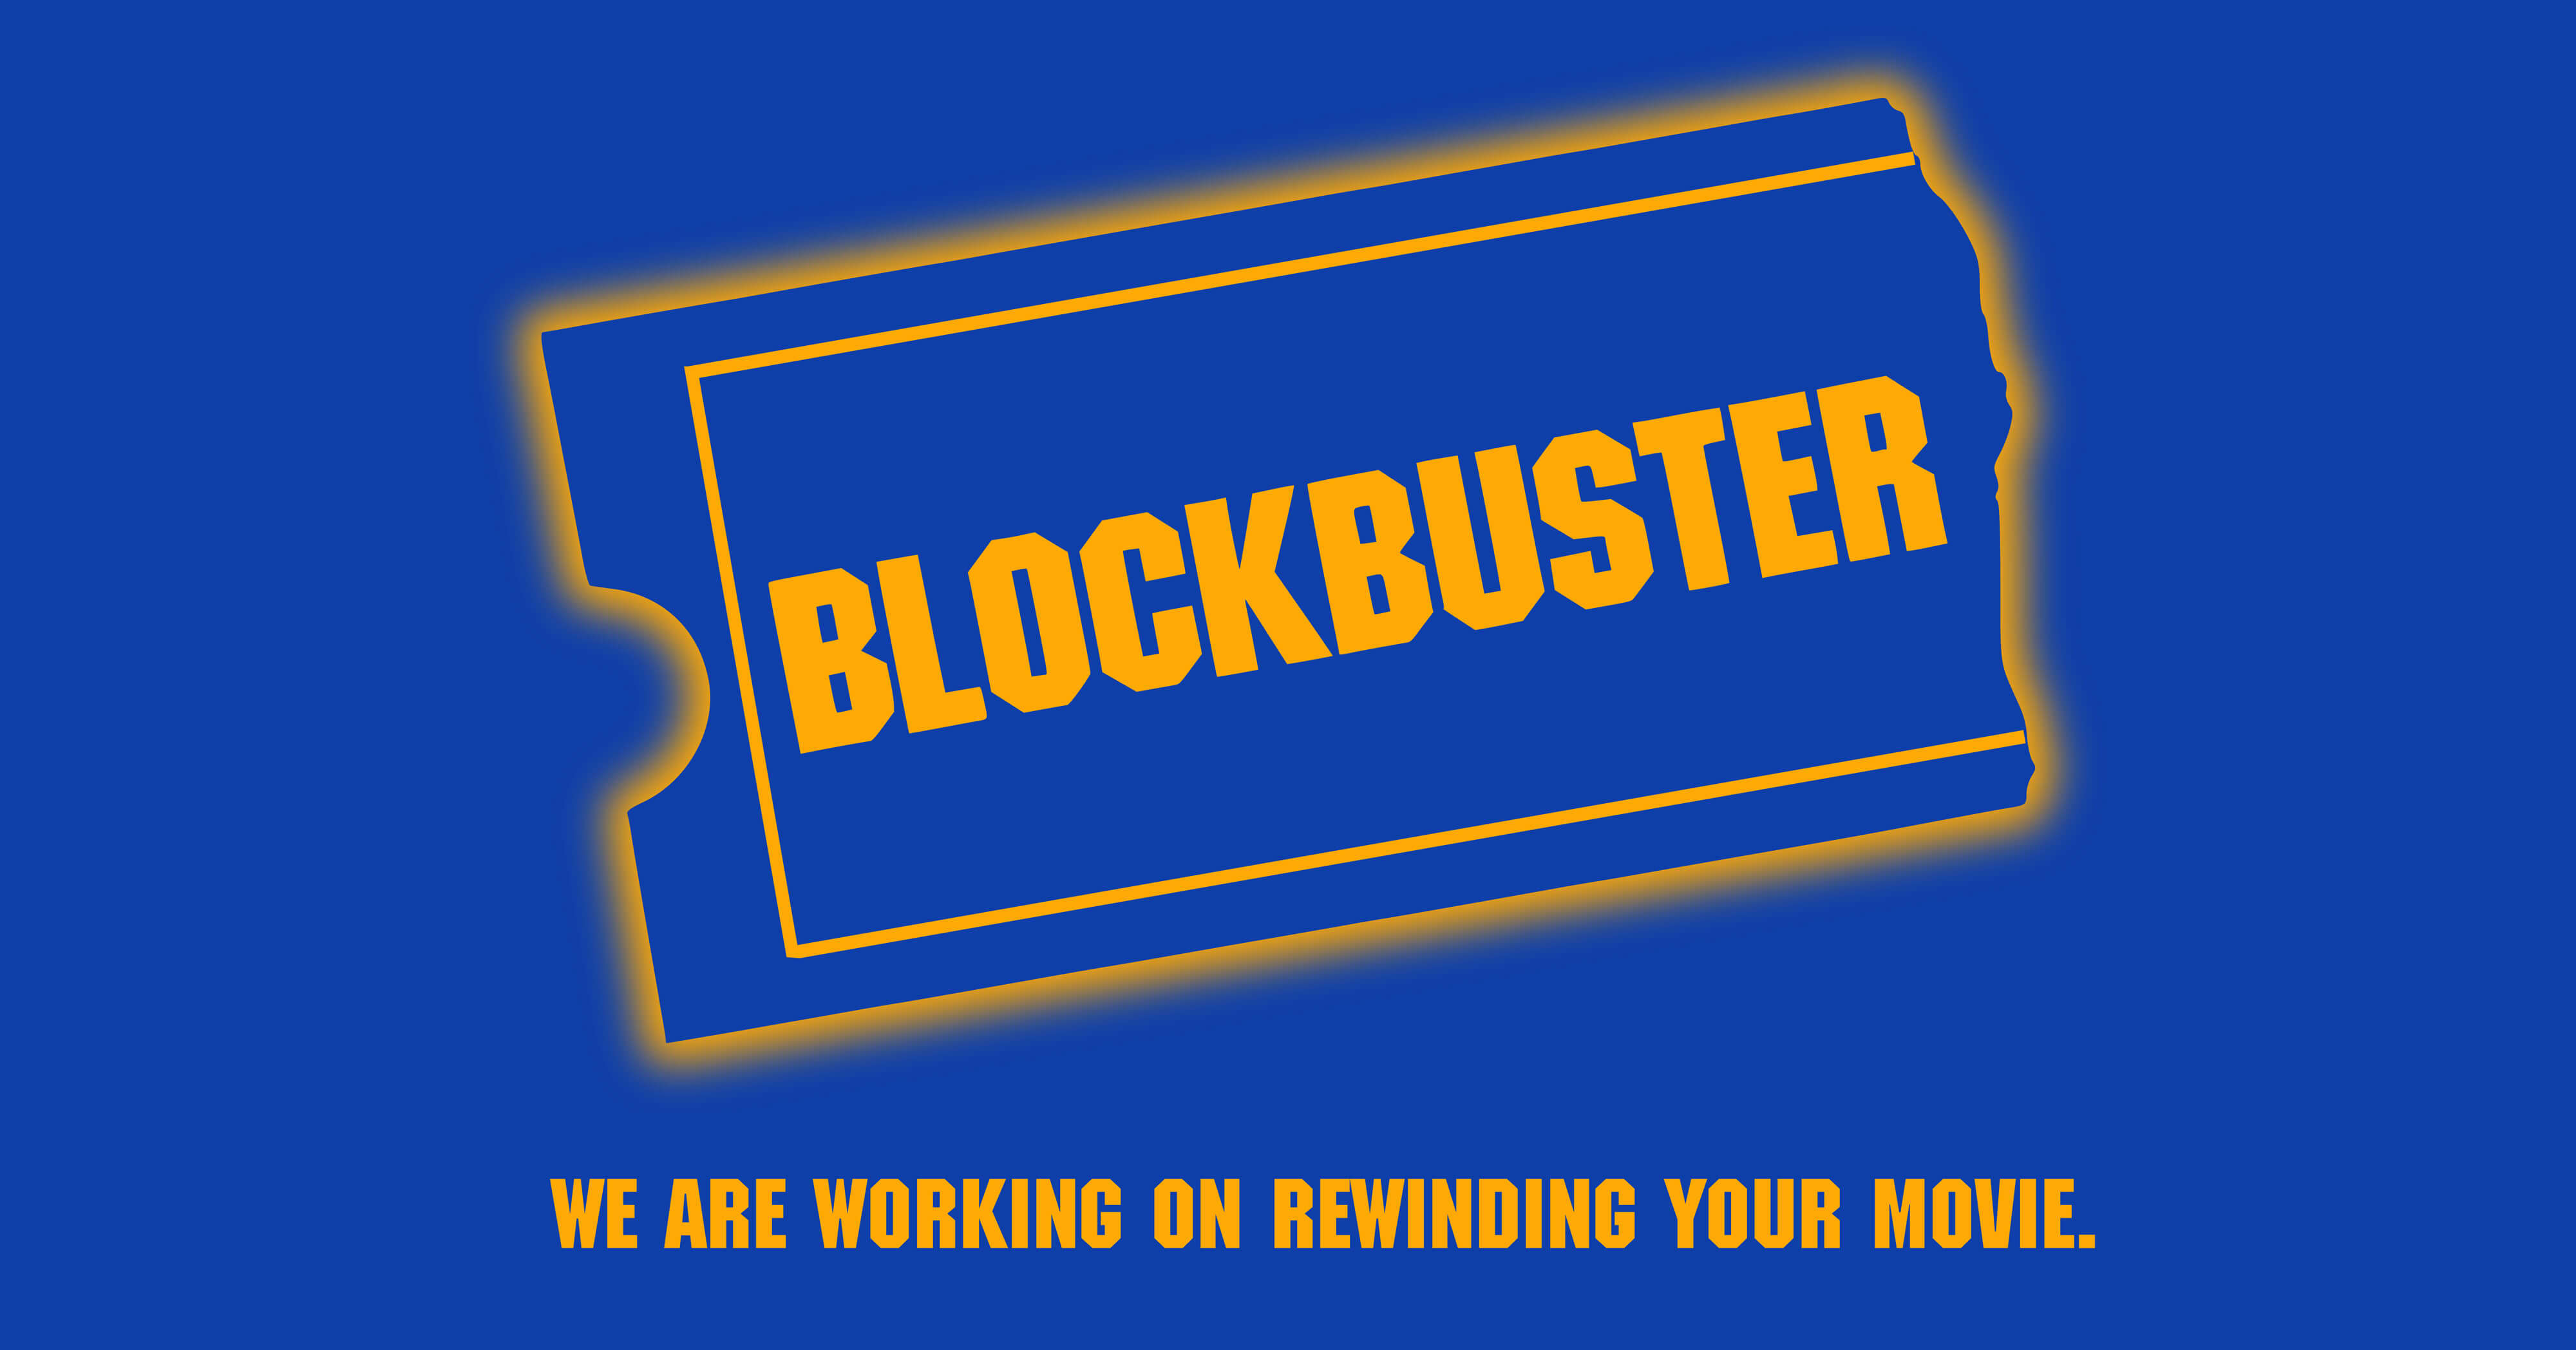 Blockbuster: We are working on rewinding your movie.